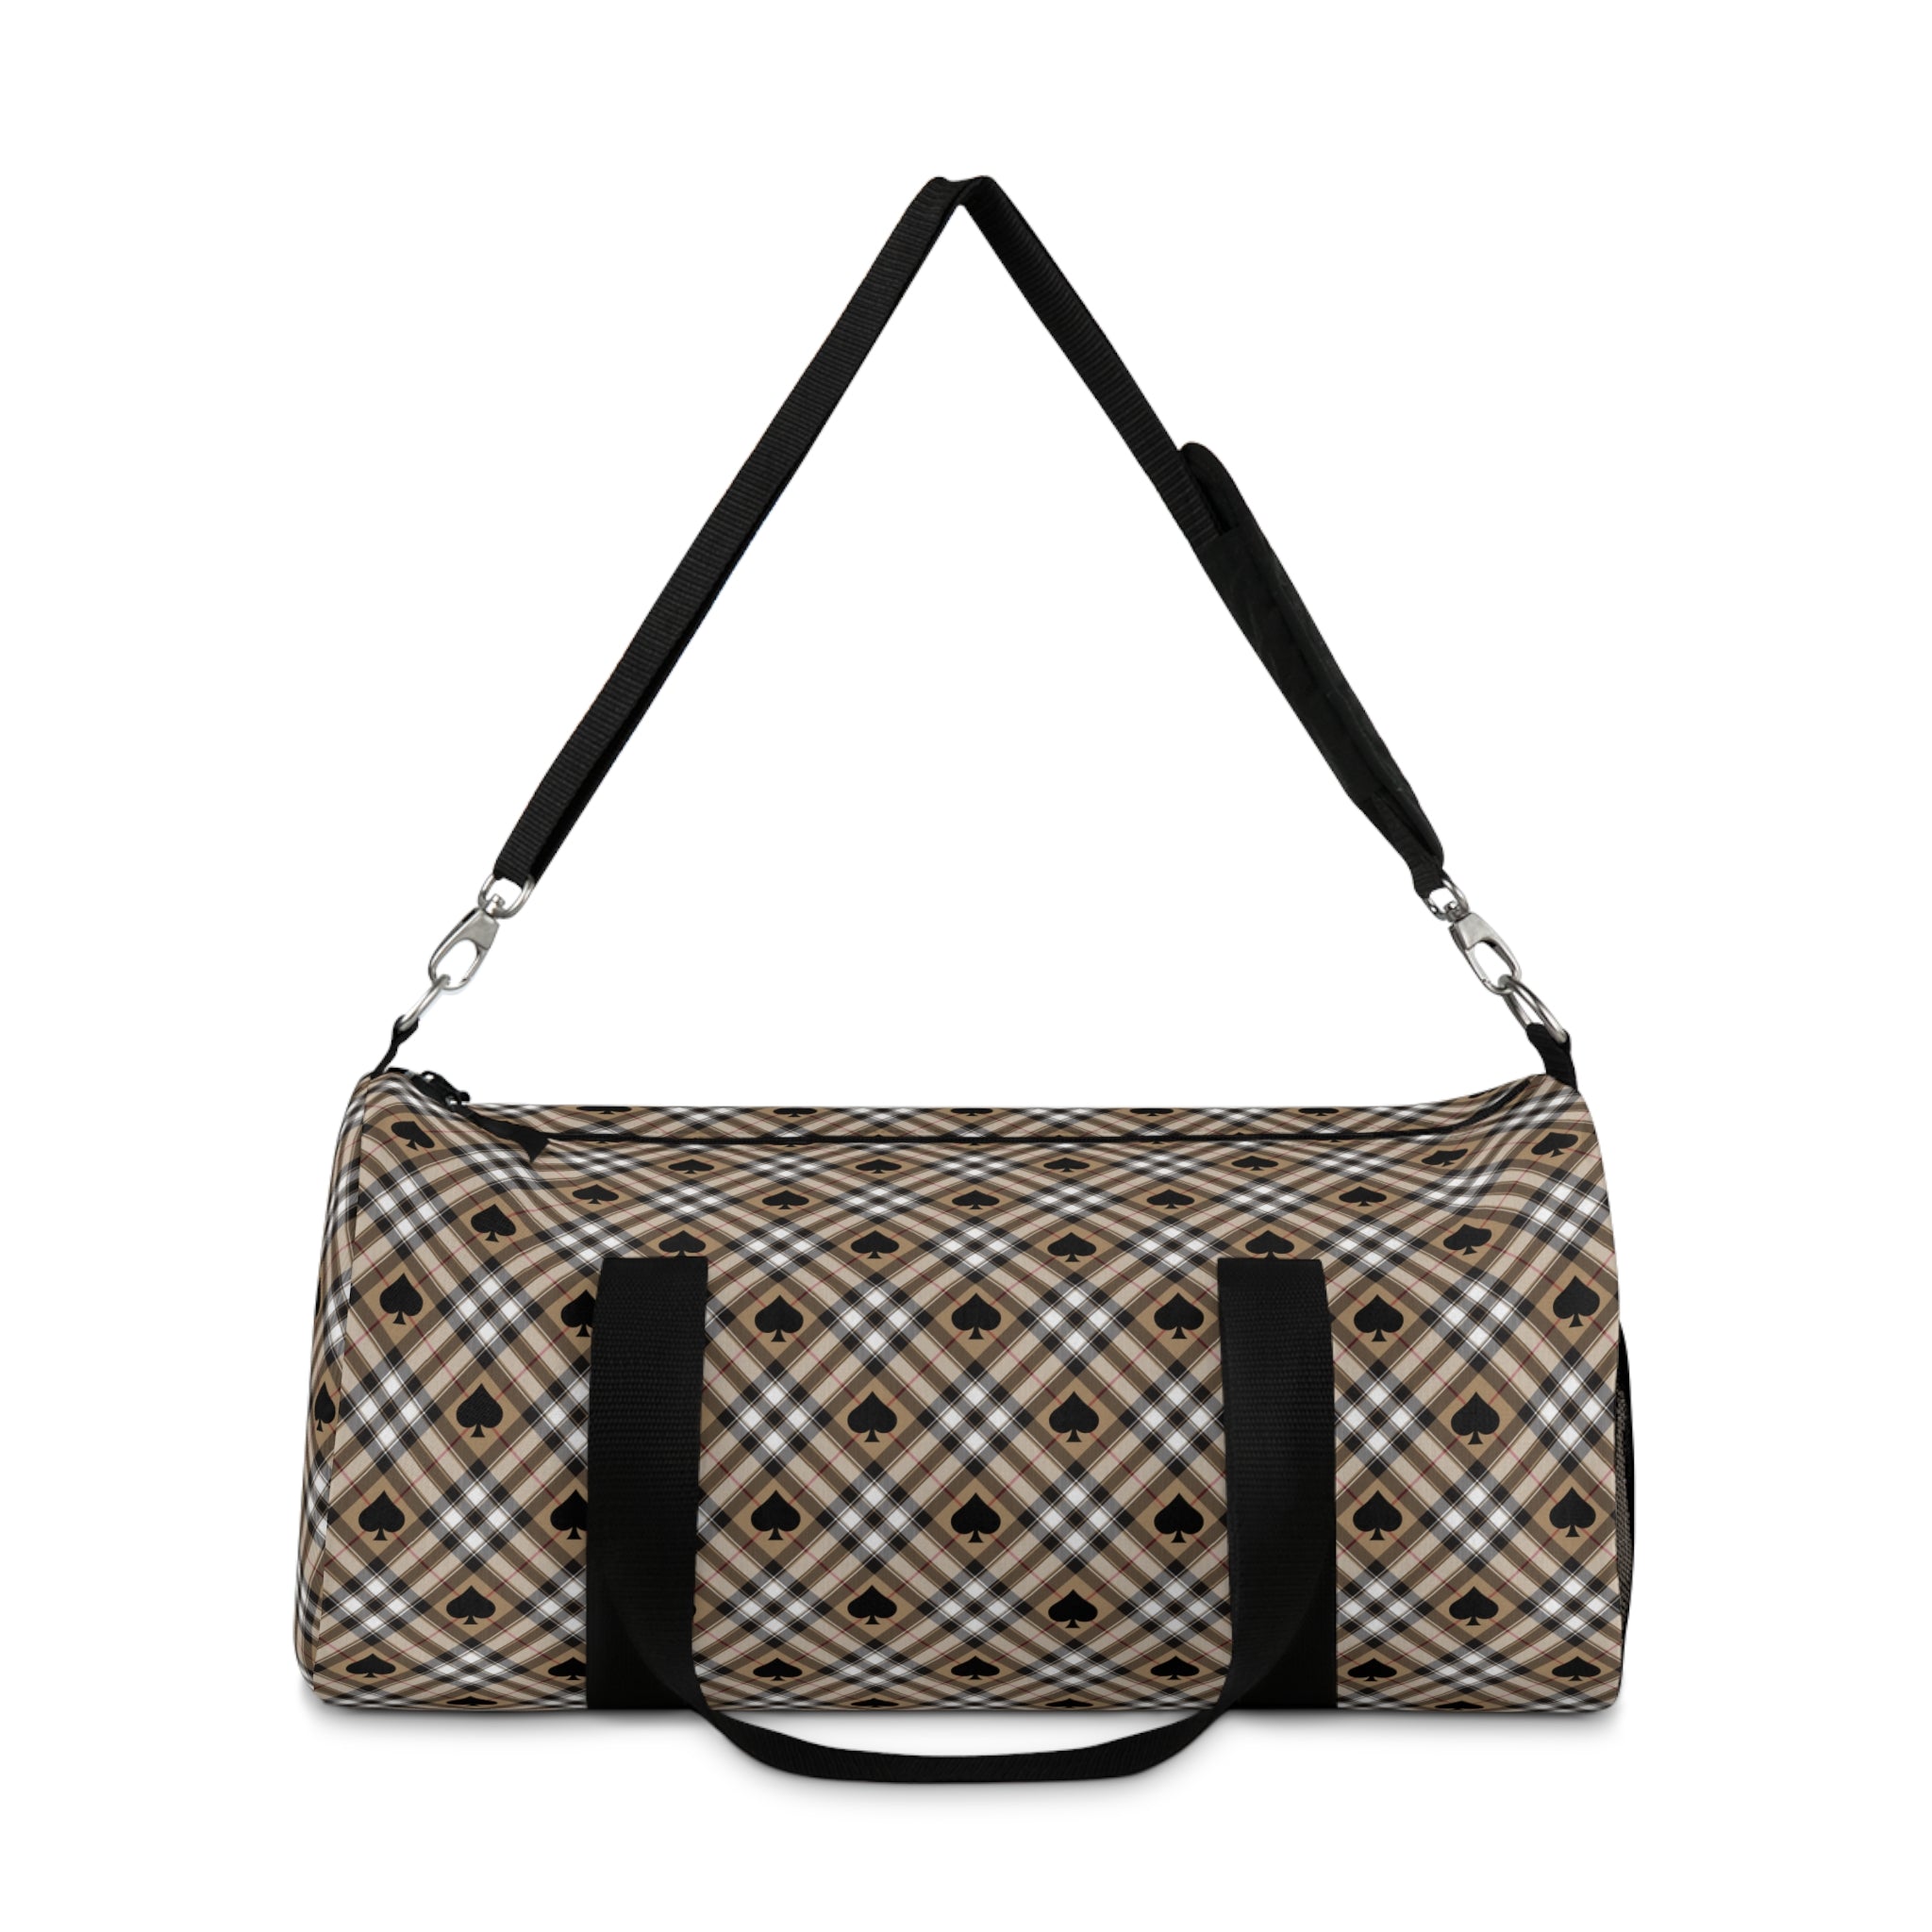  Abby Beige Ace of Spades (Small Pattern) Duffel Bag, Travel and Overnight Bag BagsLarge